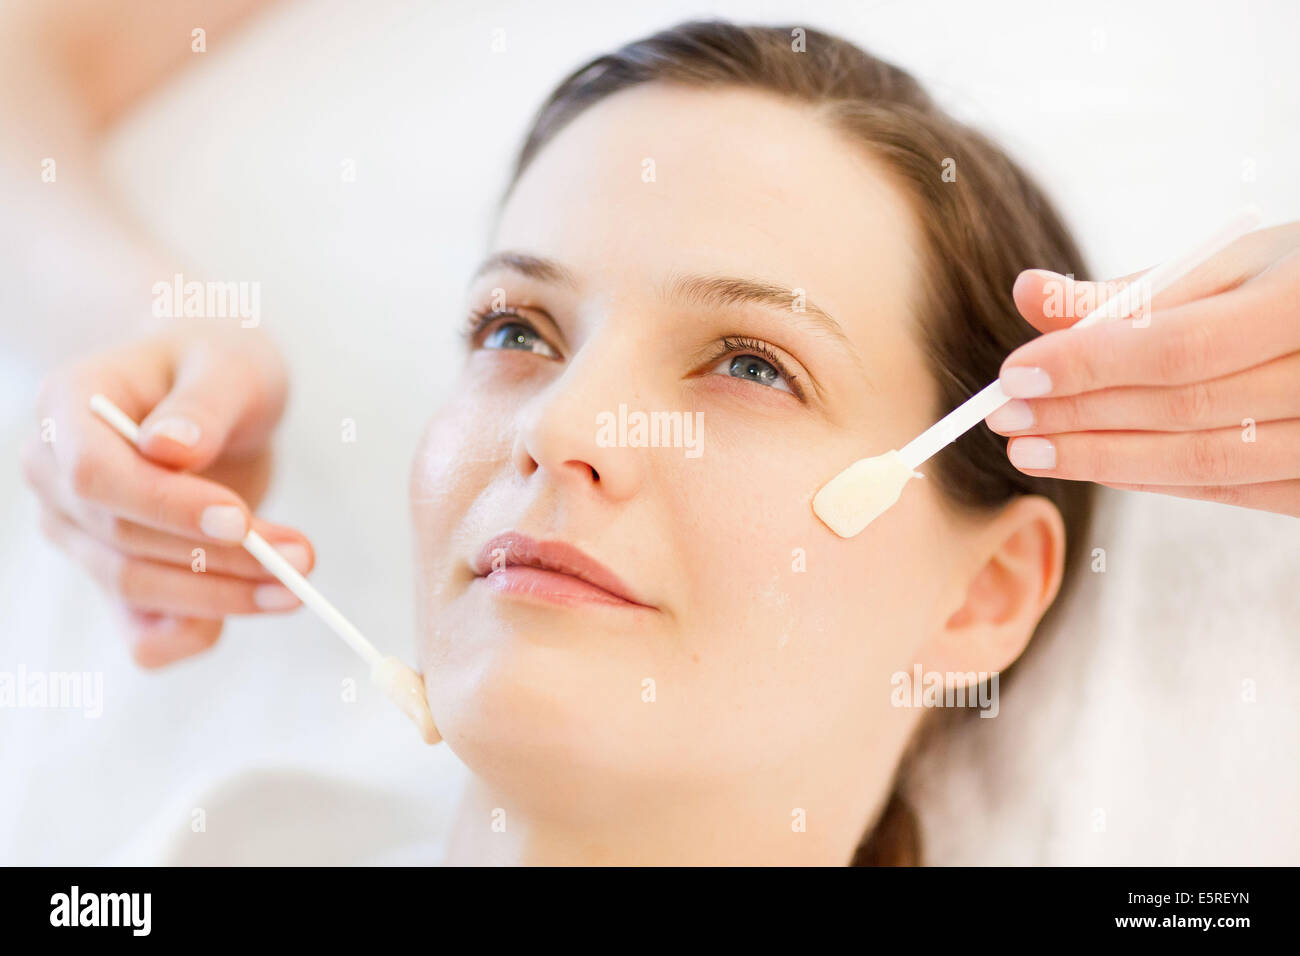 Skin peeling by application of a glycolic acid. Stock Photo